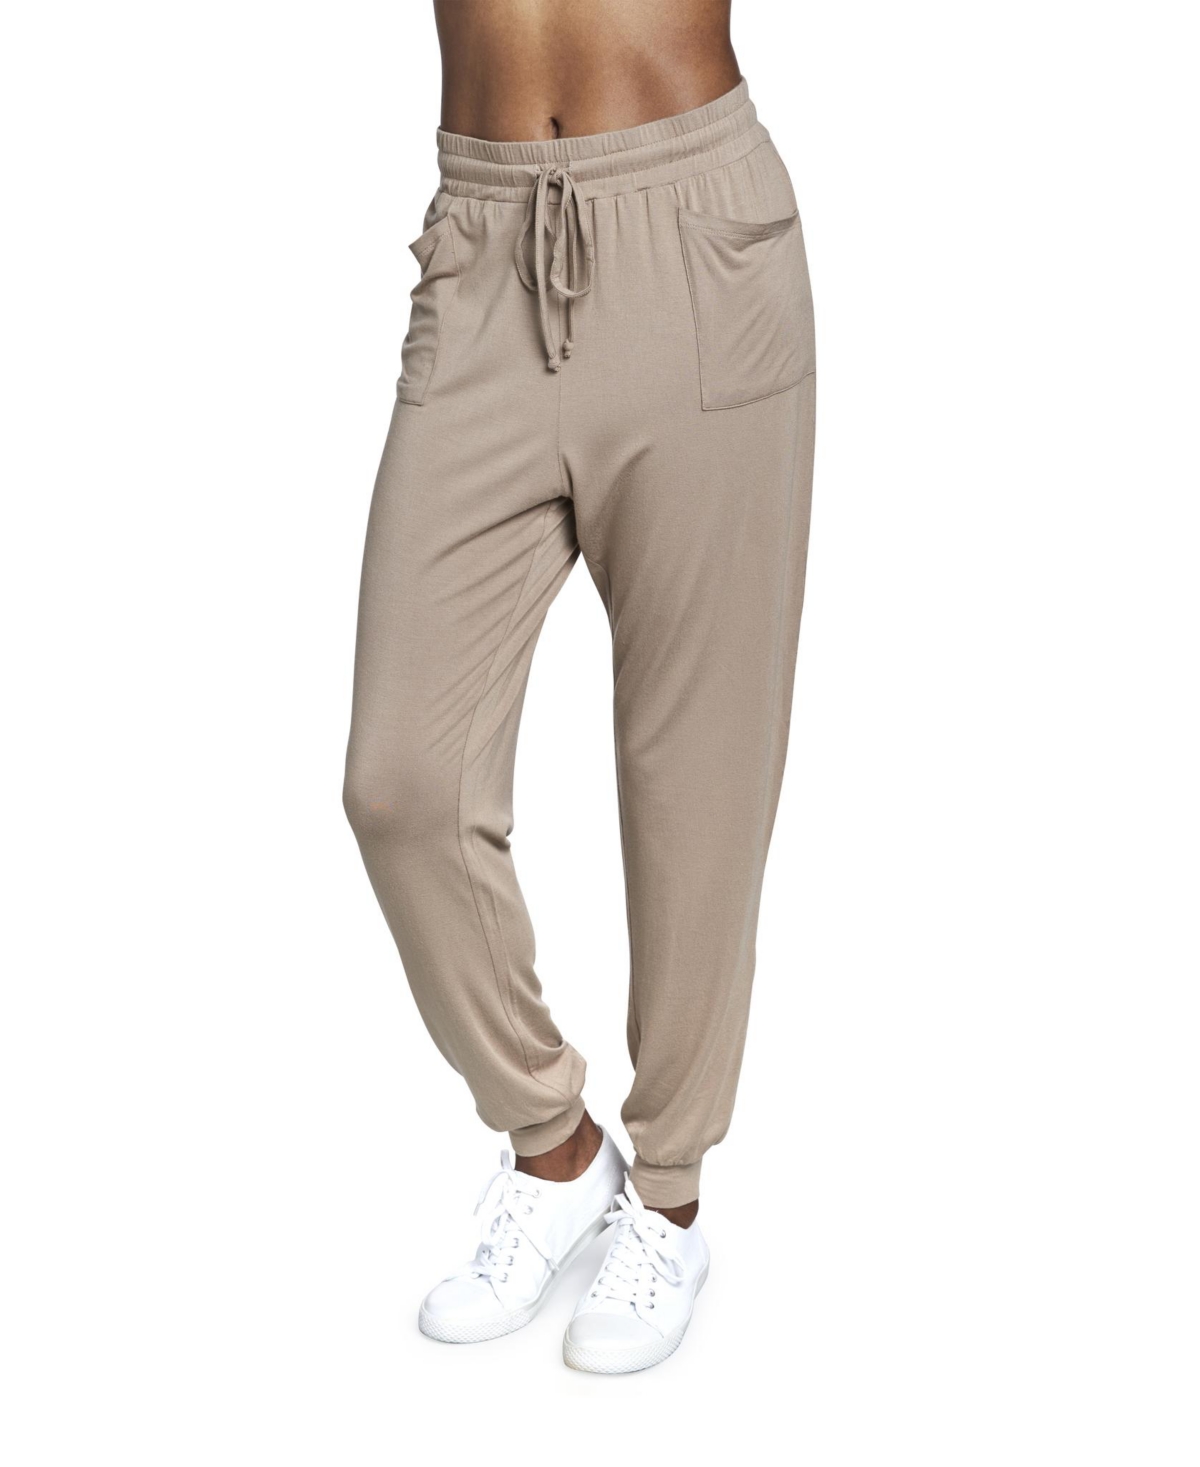 EVERLY GREY MATERNITY CARMEN DURING & AFTER JOGGER PANTS